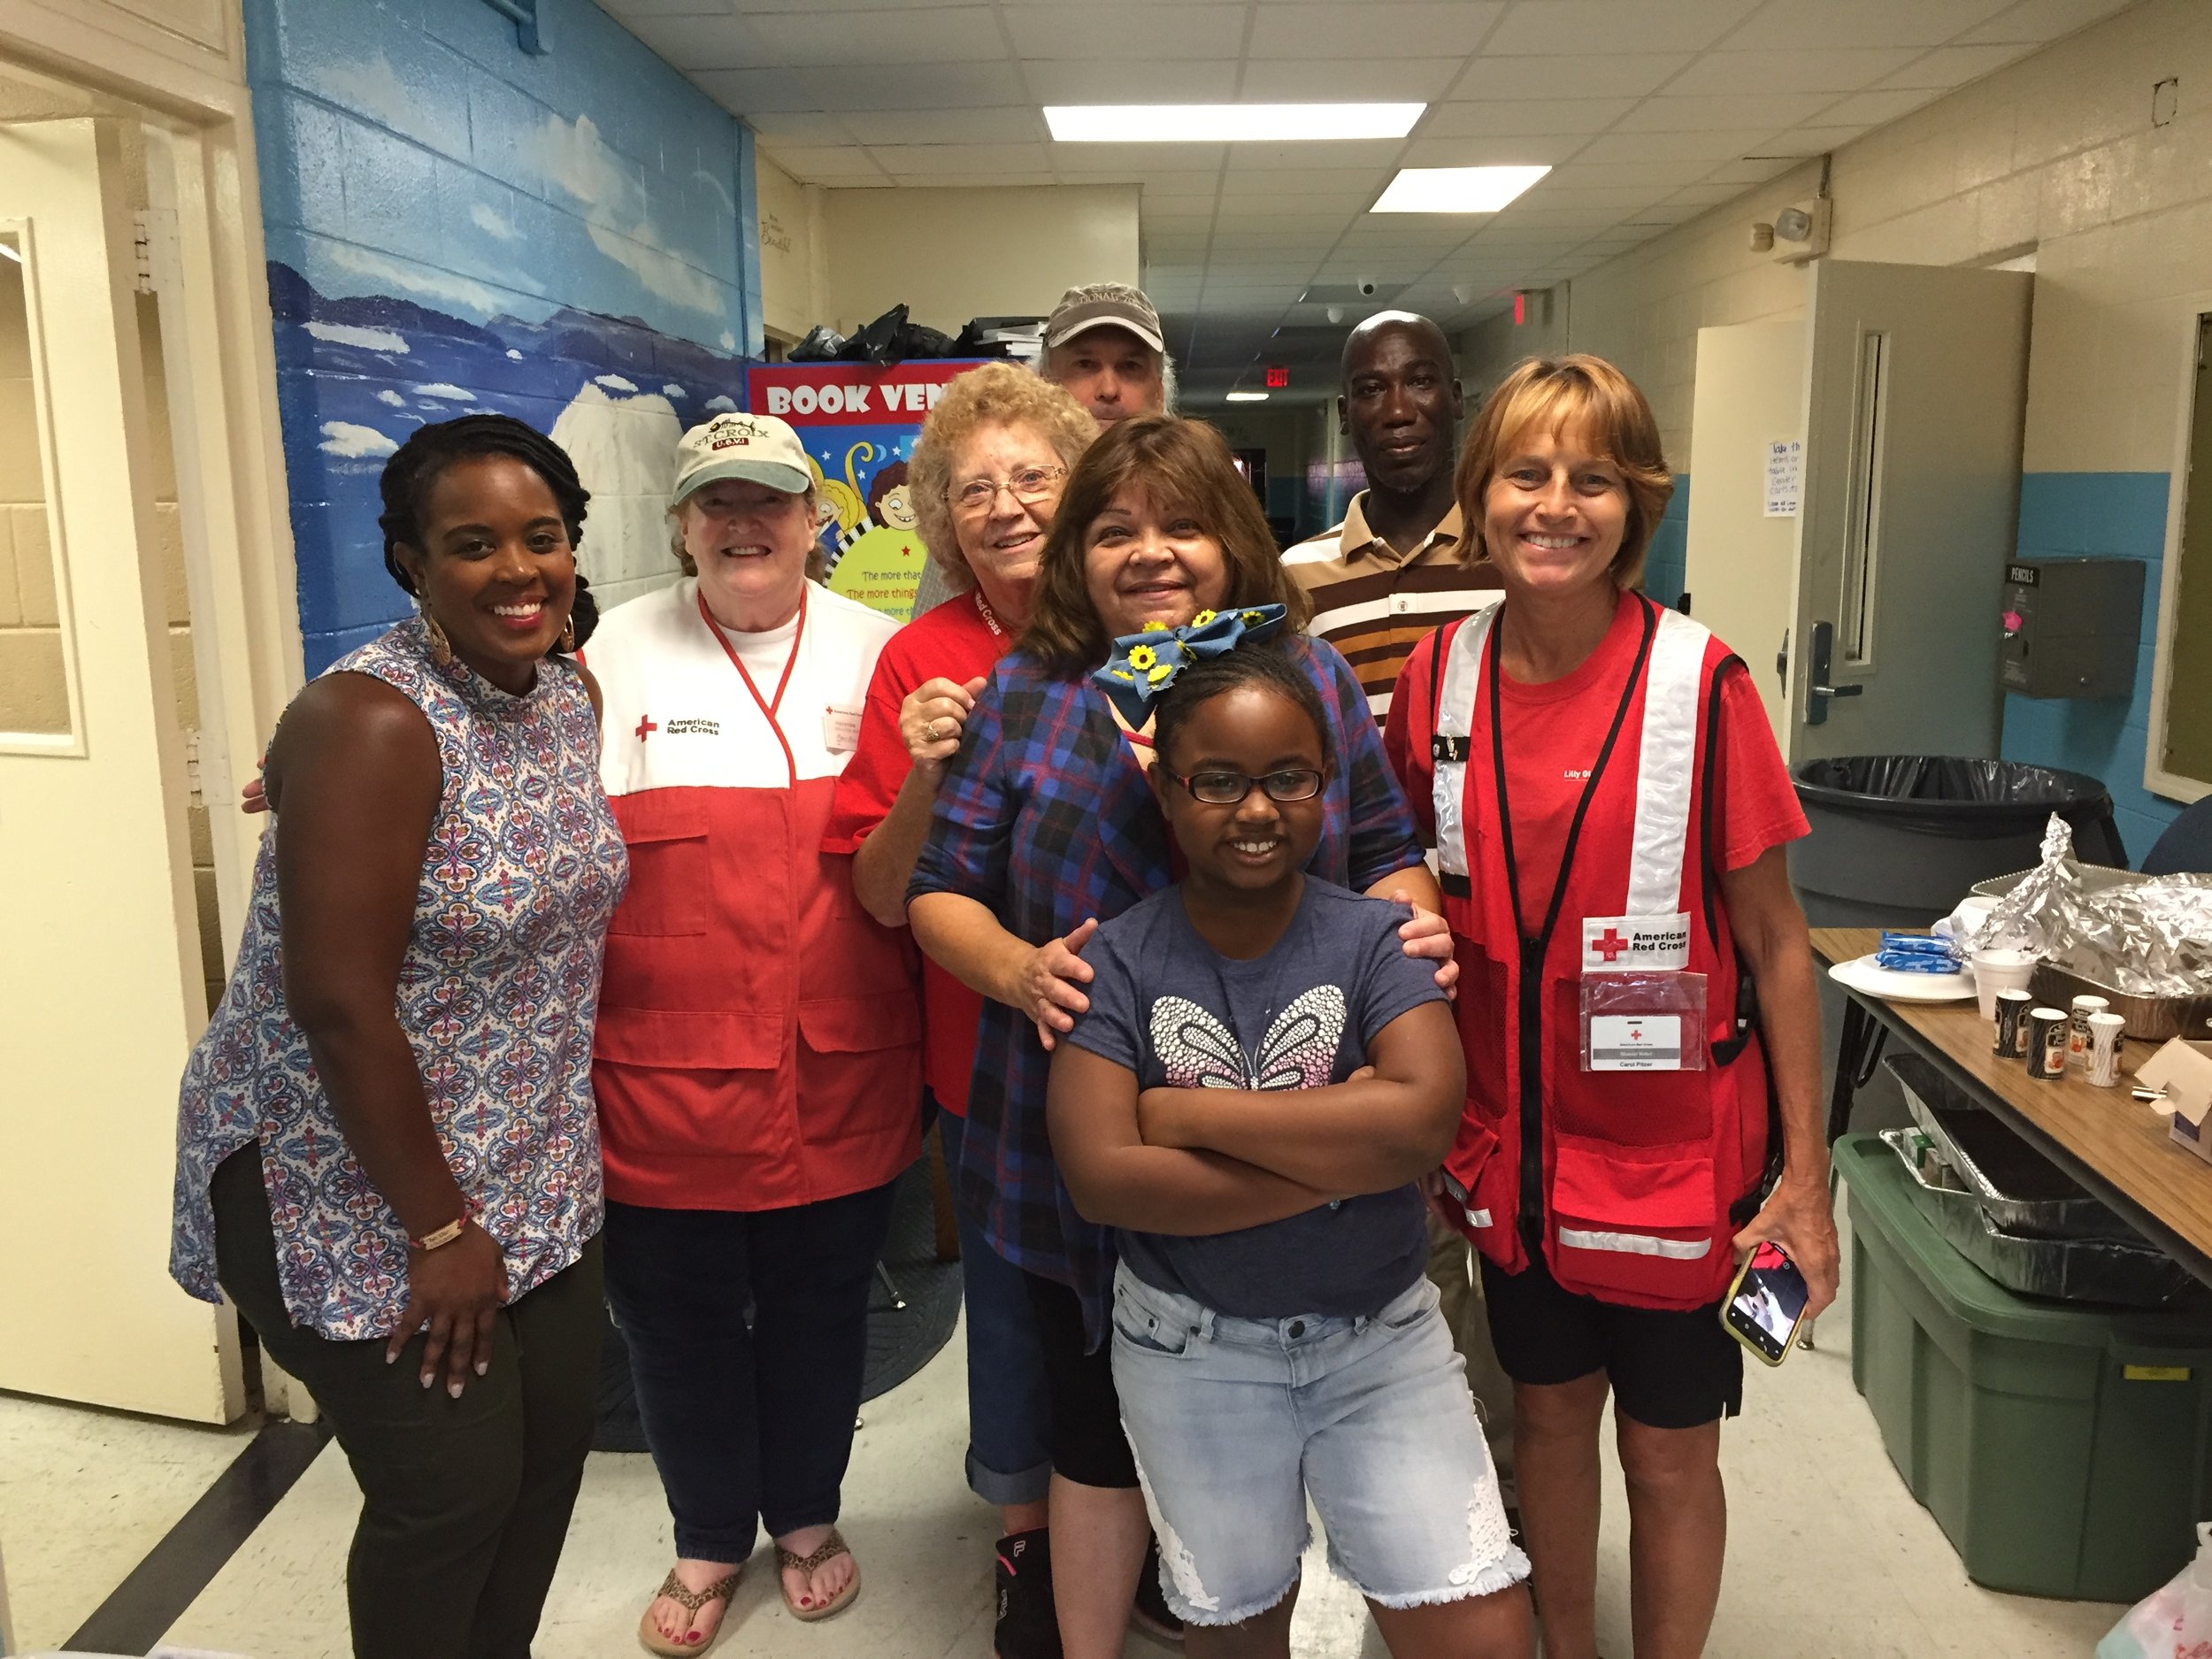  Carol Pitzer (front right) and Red Cross team members pause for a photo with community members who brought breakfast to clients in a North Carolina shelter during Hurricane Florence. (Photo courtesy of Carol Pitzer) 